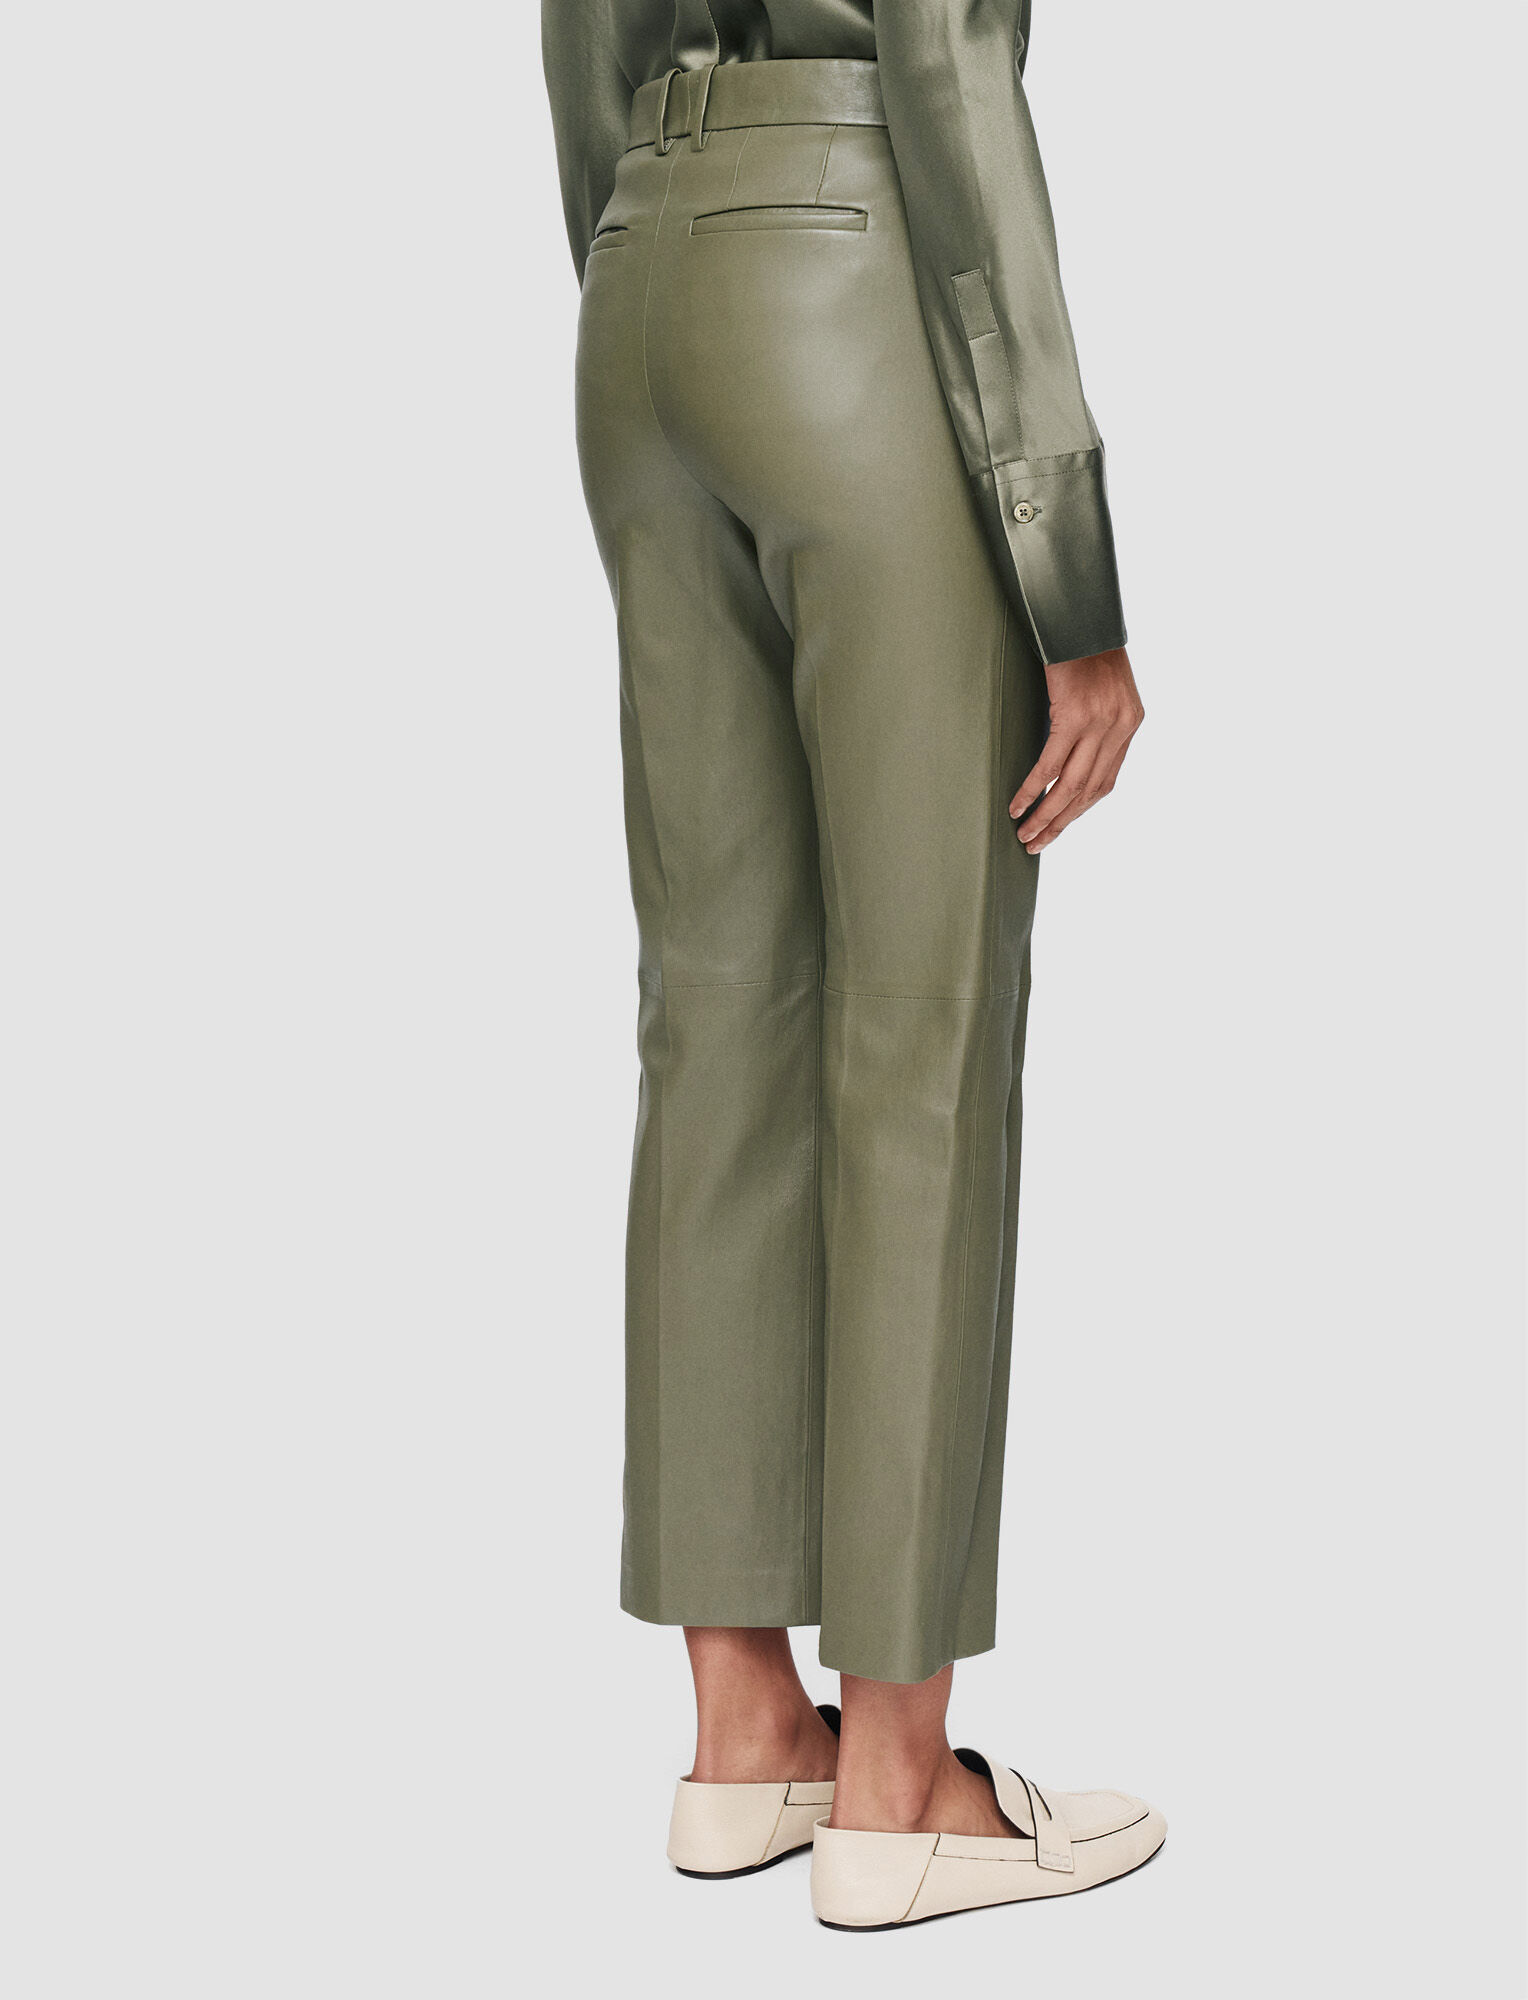 Joseph, Leather Stretch Coleman Trousers, in Dark Olive